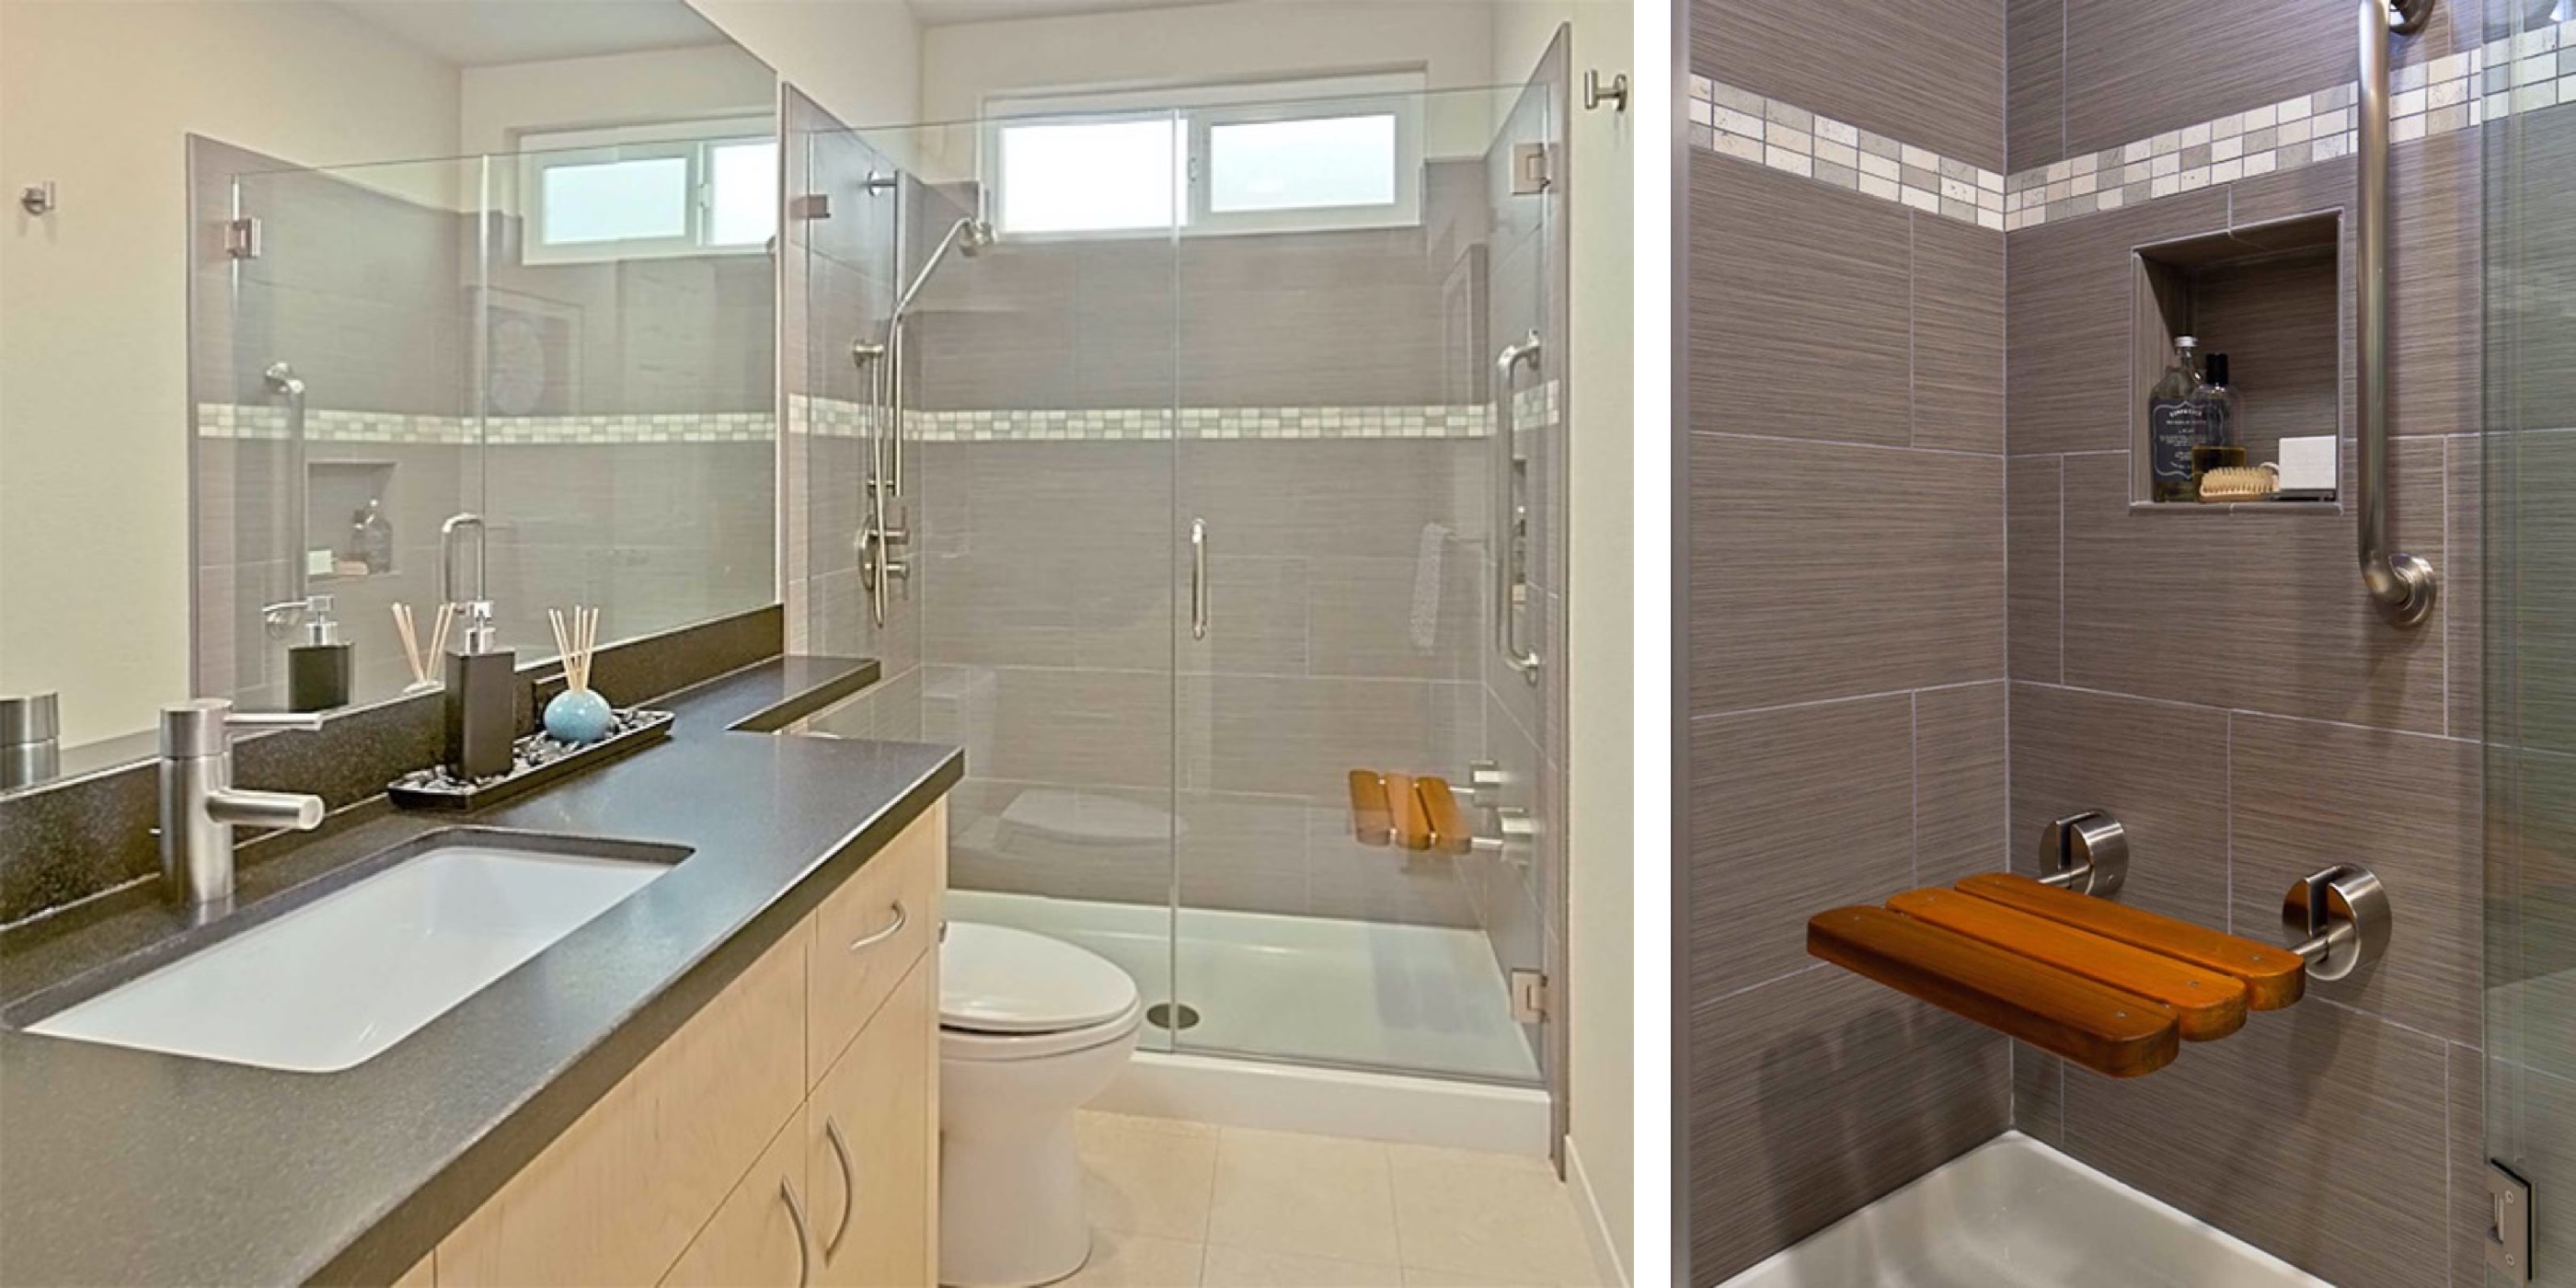 Tips to Transform Your Kitchen and Bath Remodels in the East Bay - Bathroom Renovation - Frameless Shower Door - Custom Kitchens